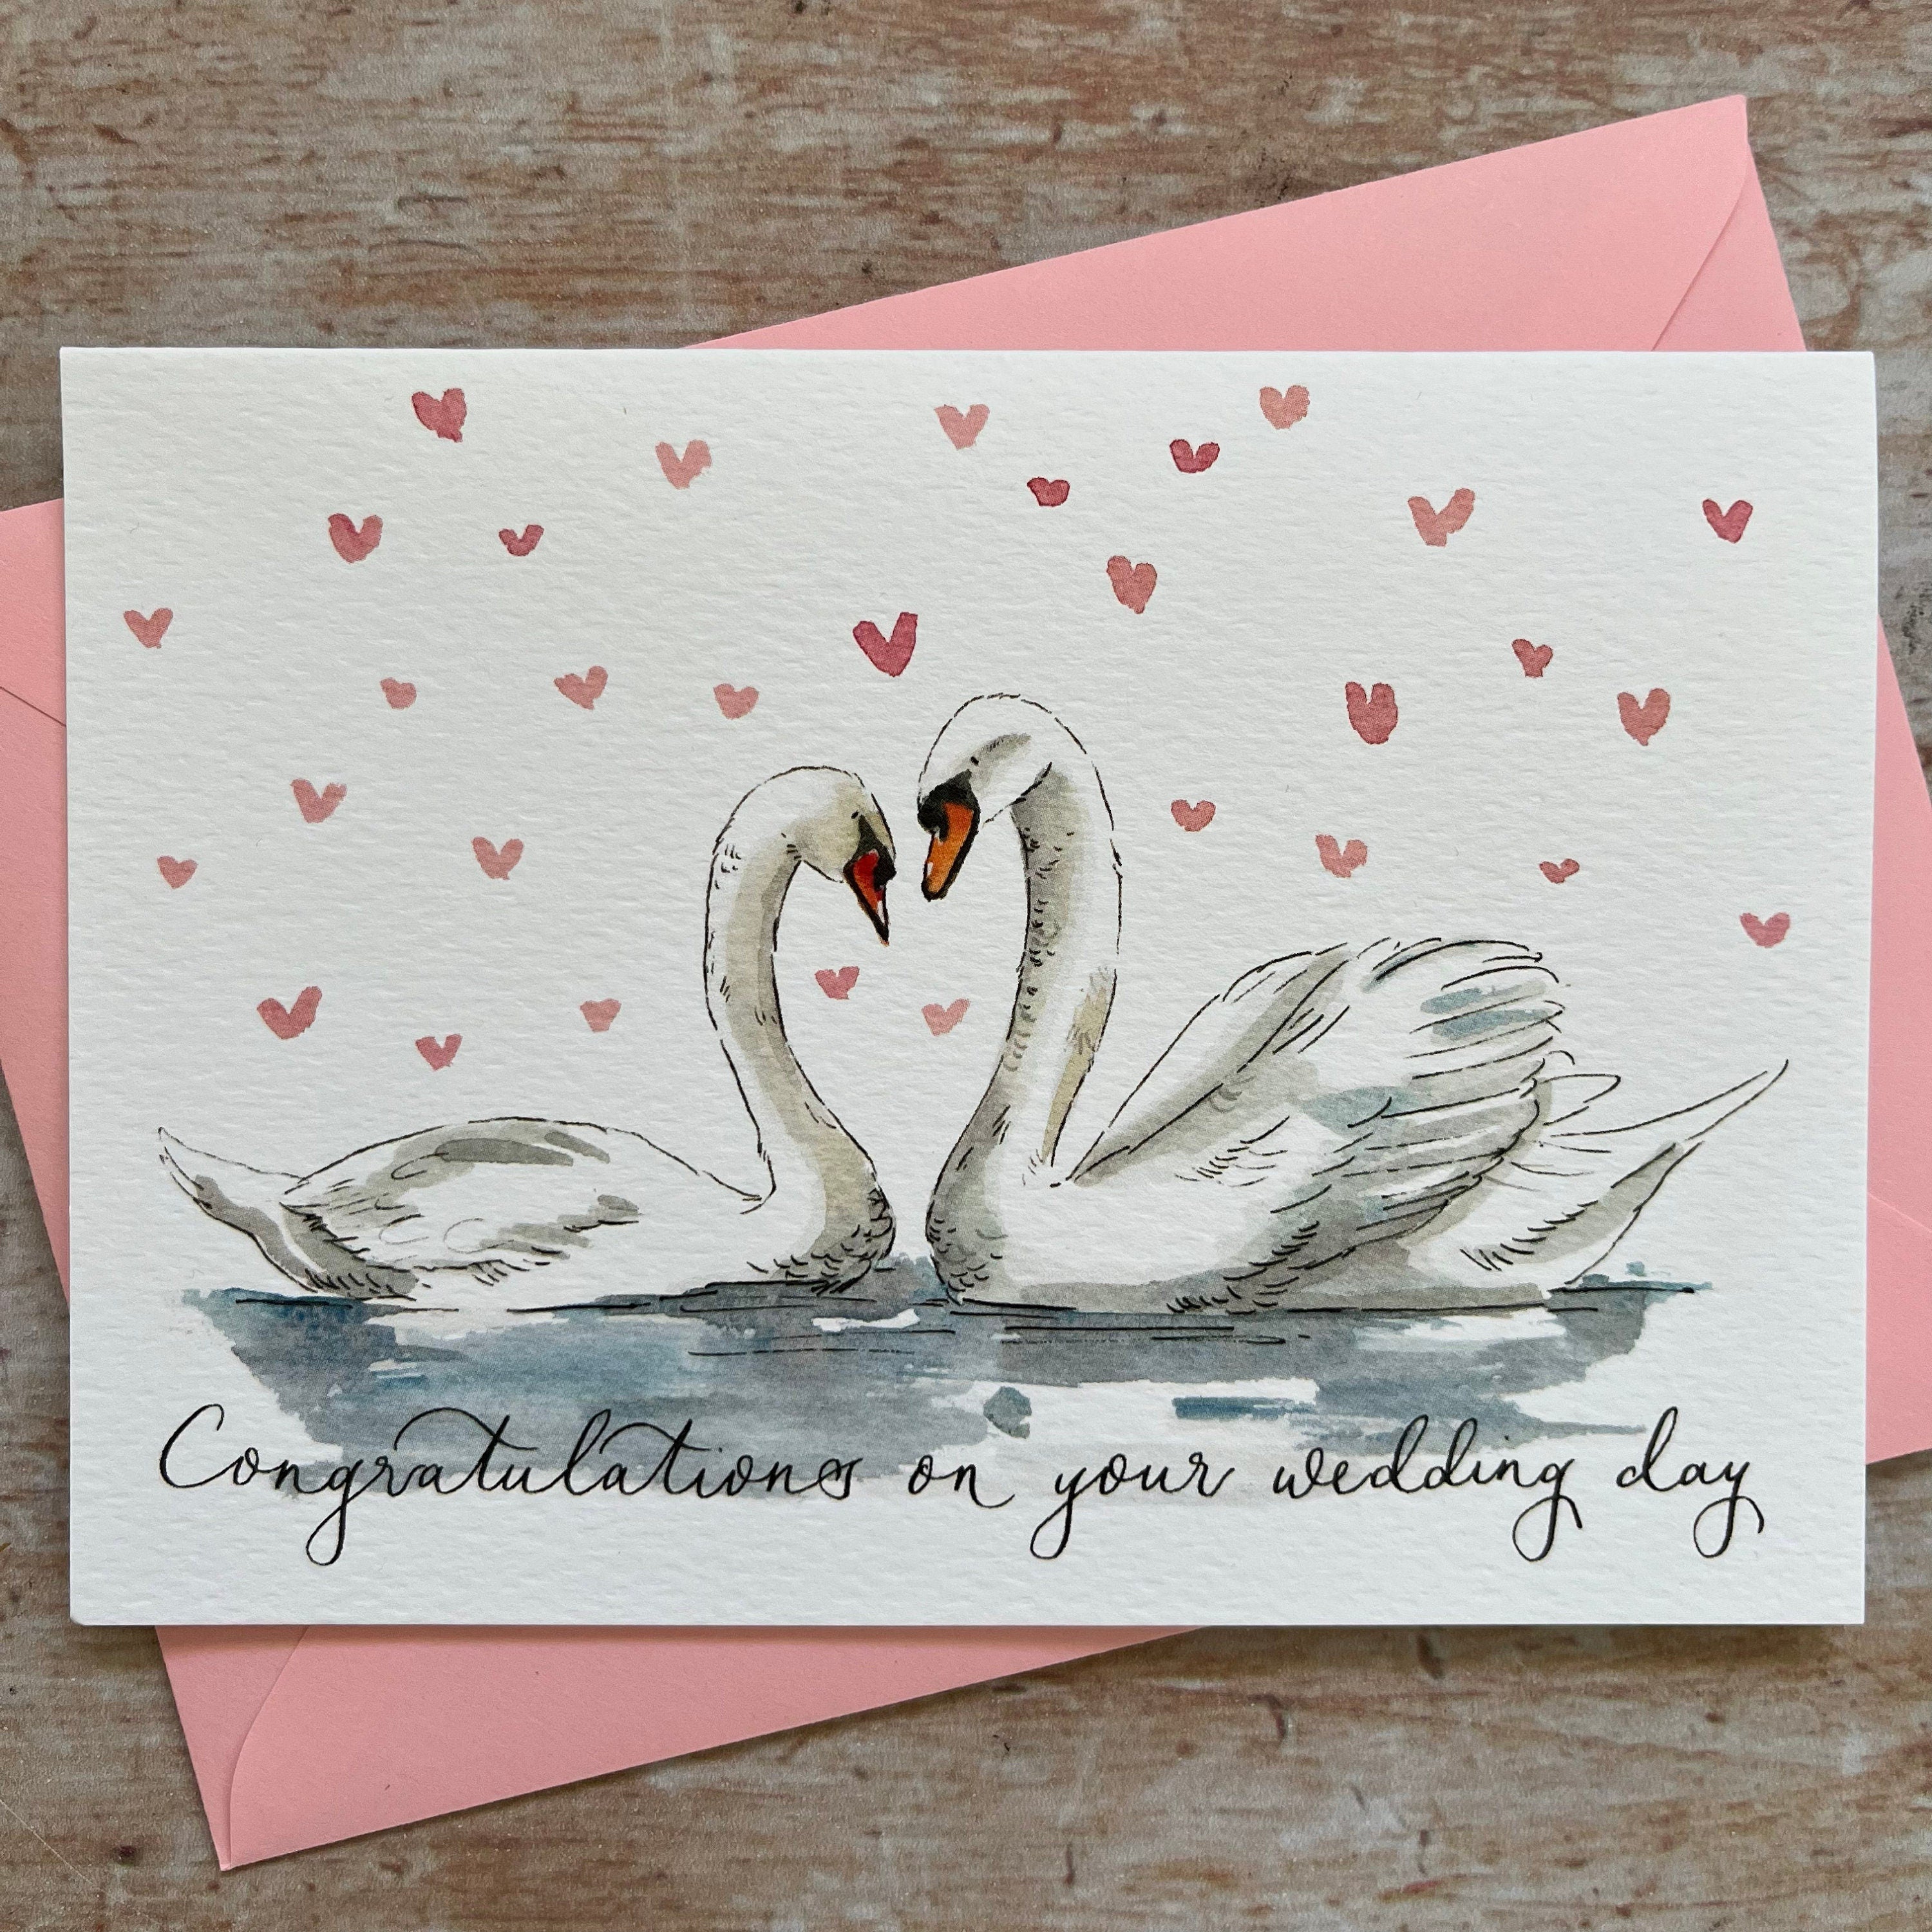 Congratulations on your Wedding Day Swan Card